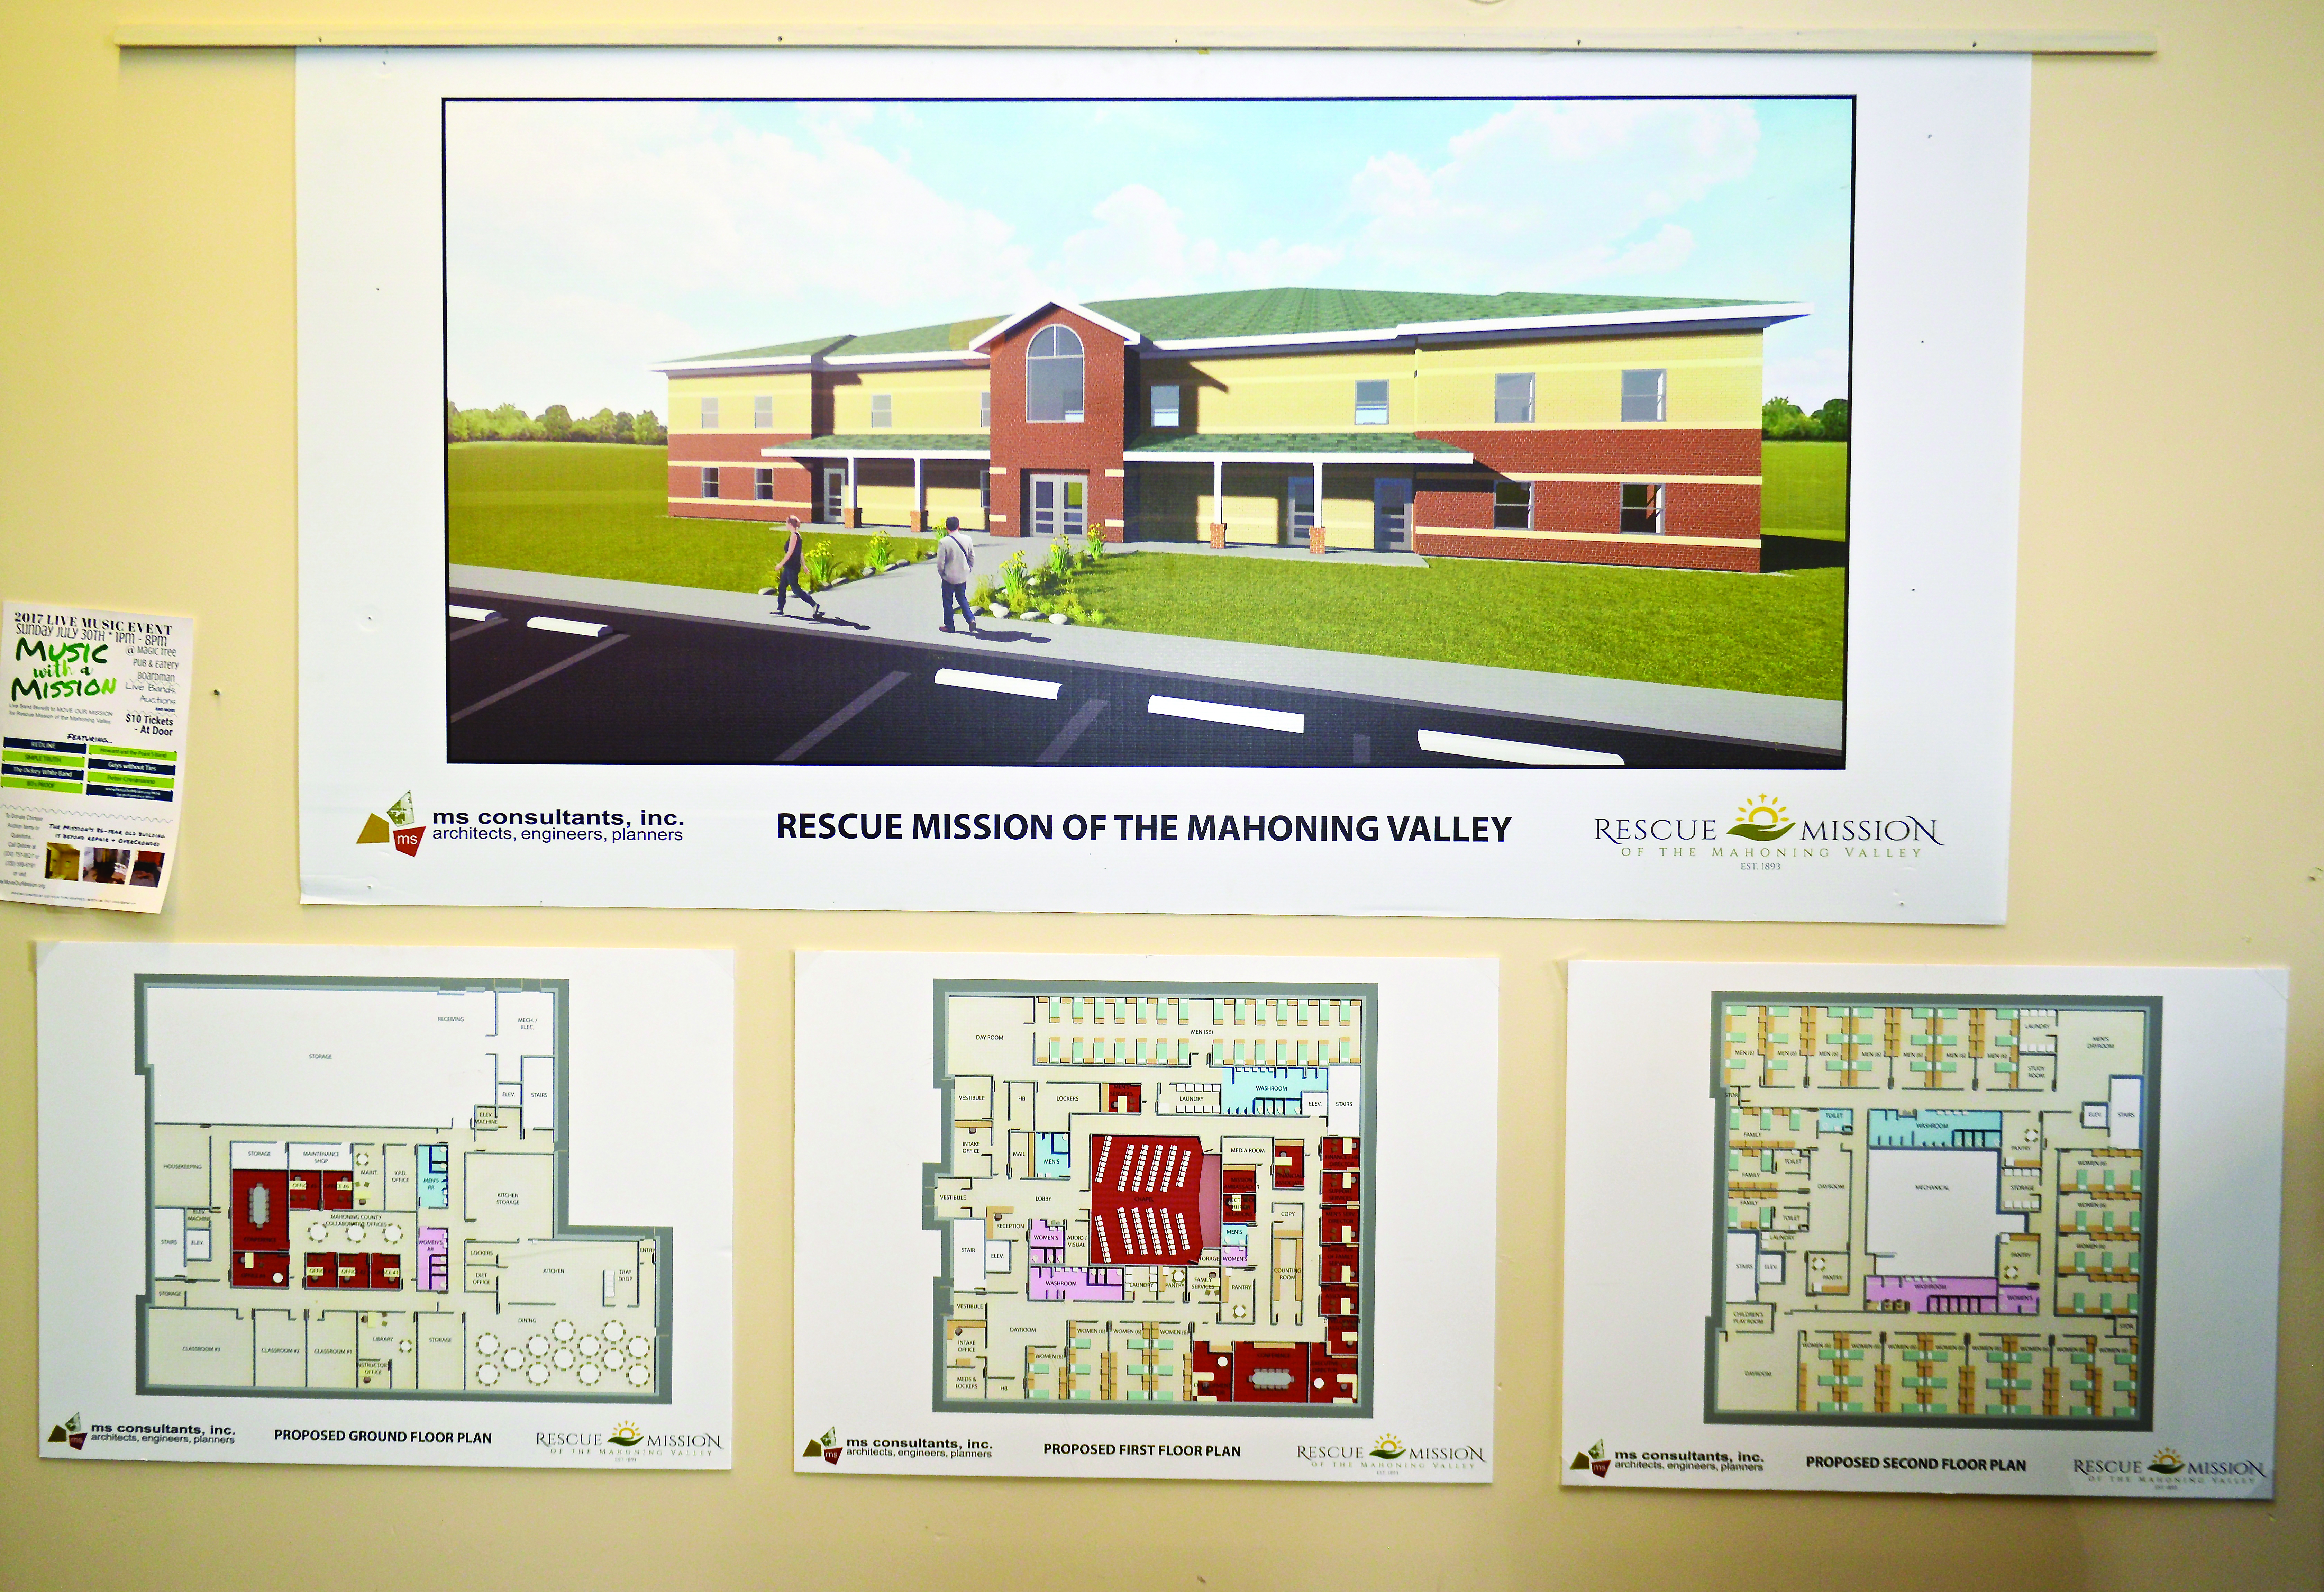 Preliminary plans for a new Rescue Mission of the Mahoning Valley building